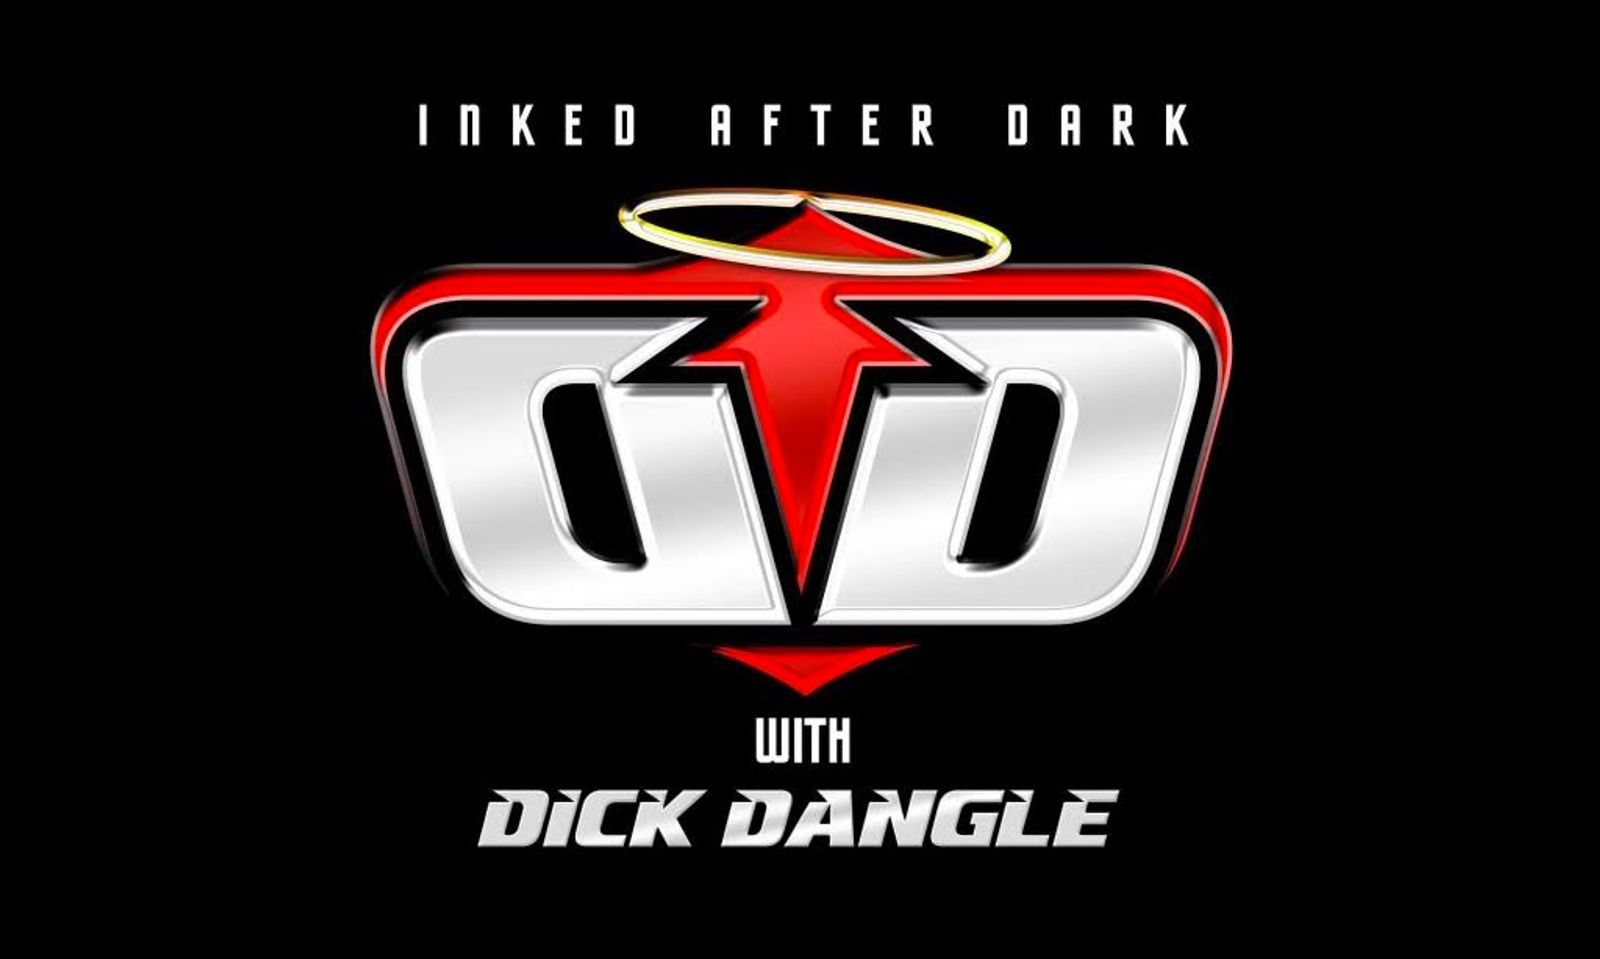 Popular Inked Angels Website Gets Its Own Podcast